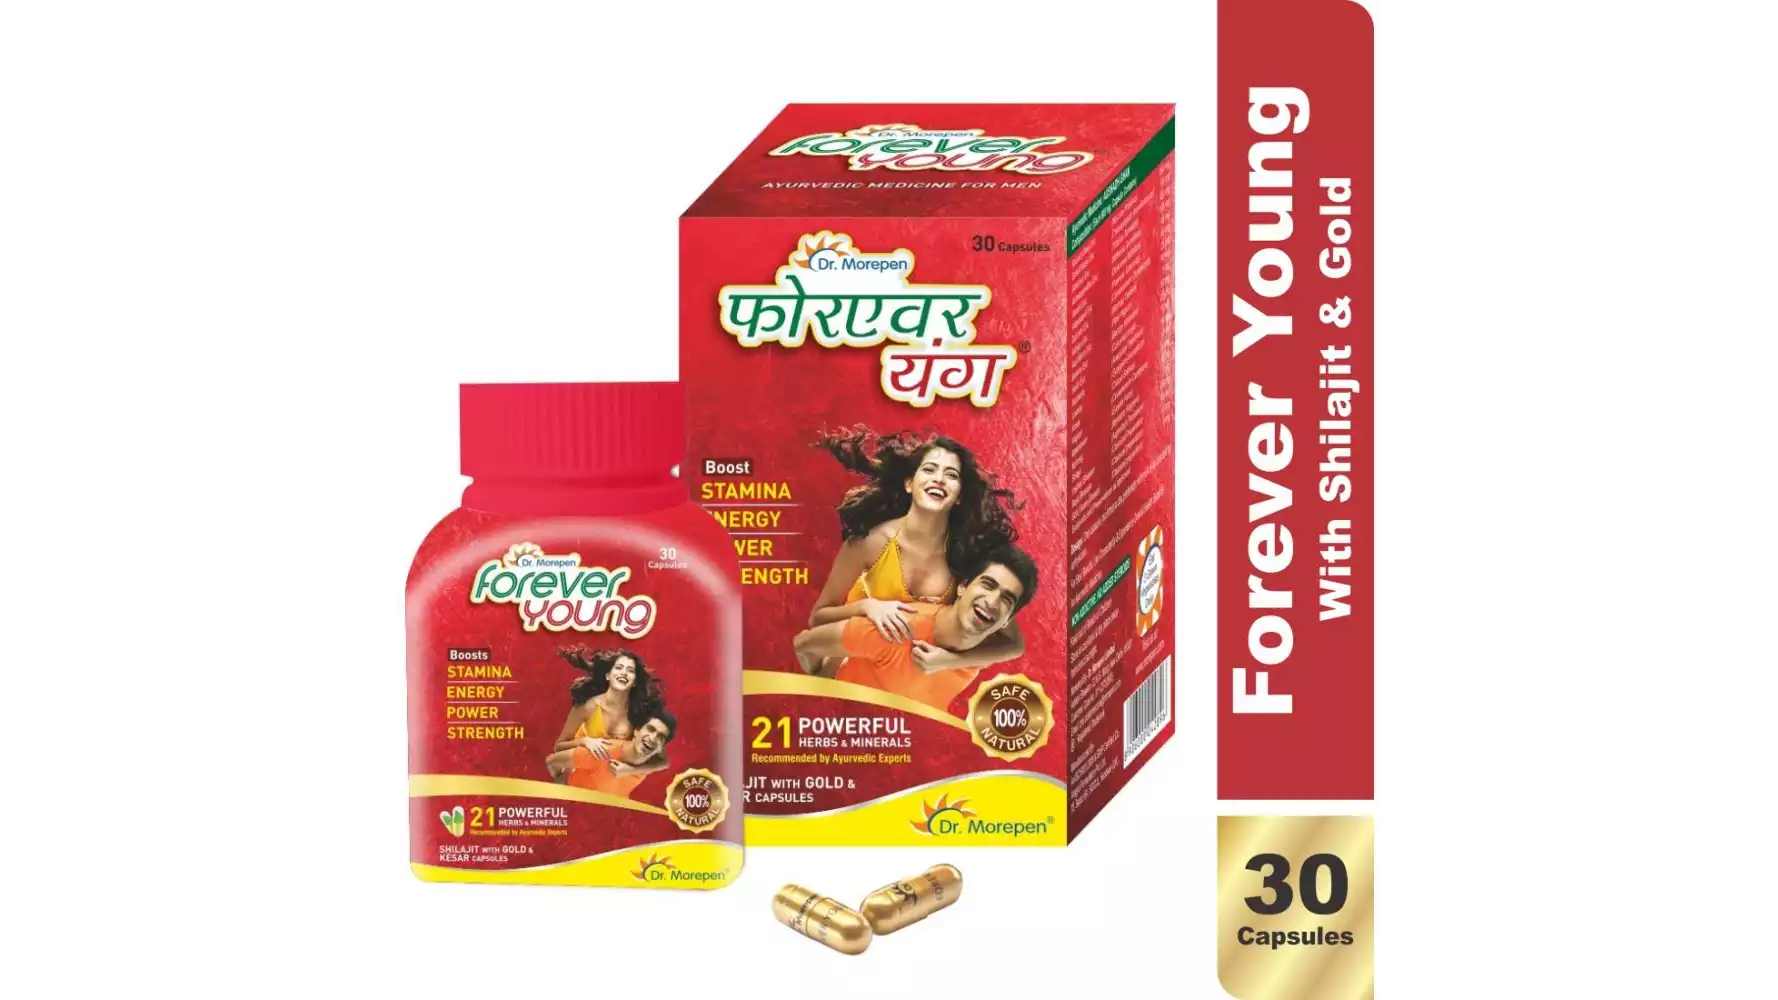 Dr Morepen Forever Young Ayurvedic Energy Revitalizer Capsules (30caps)